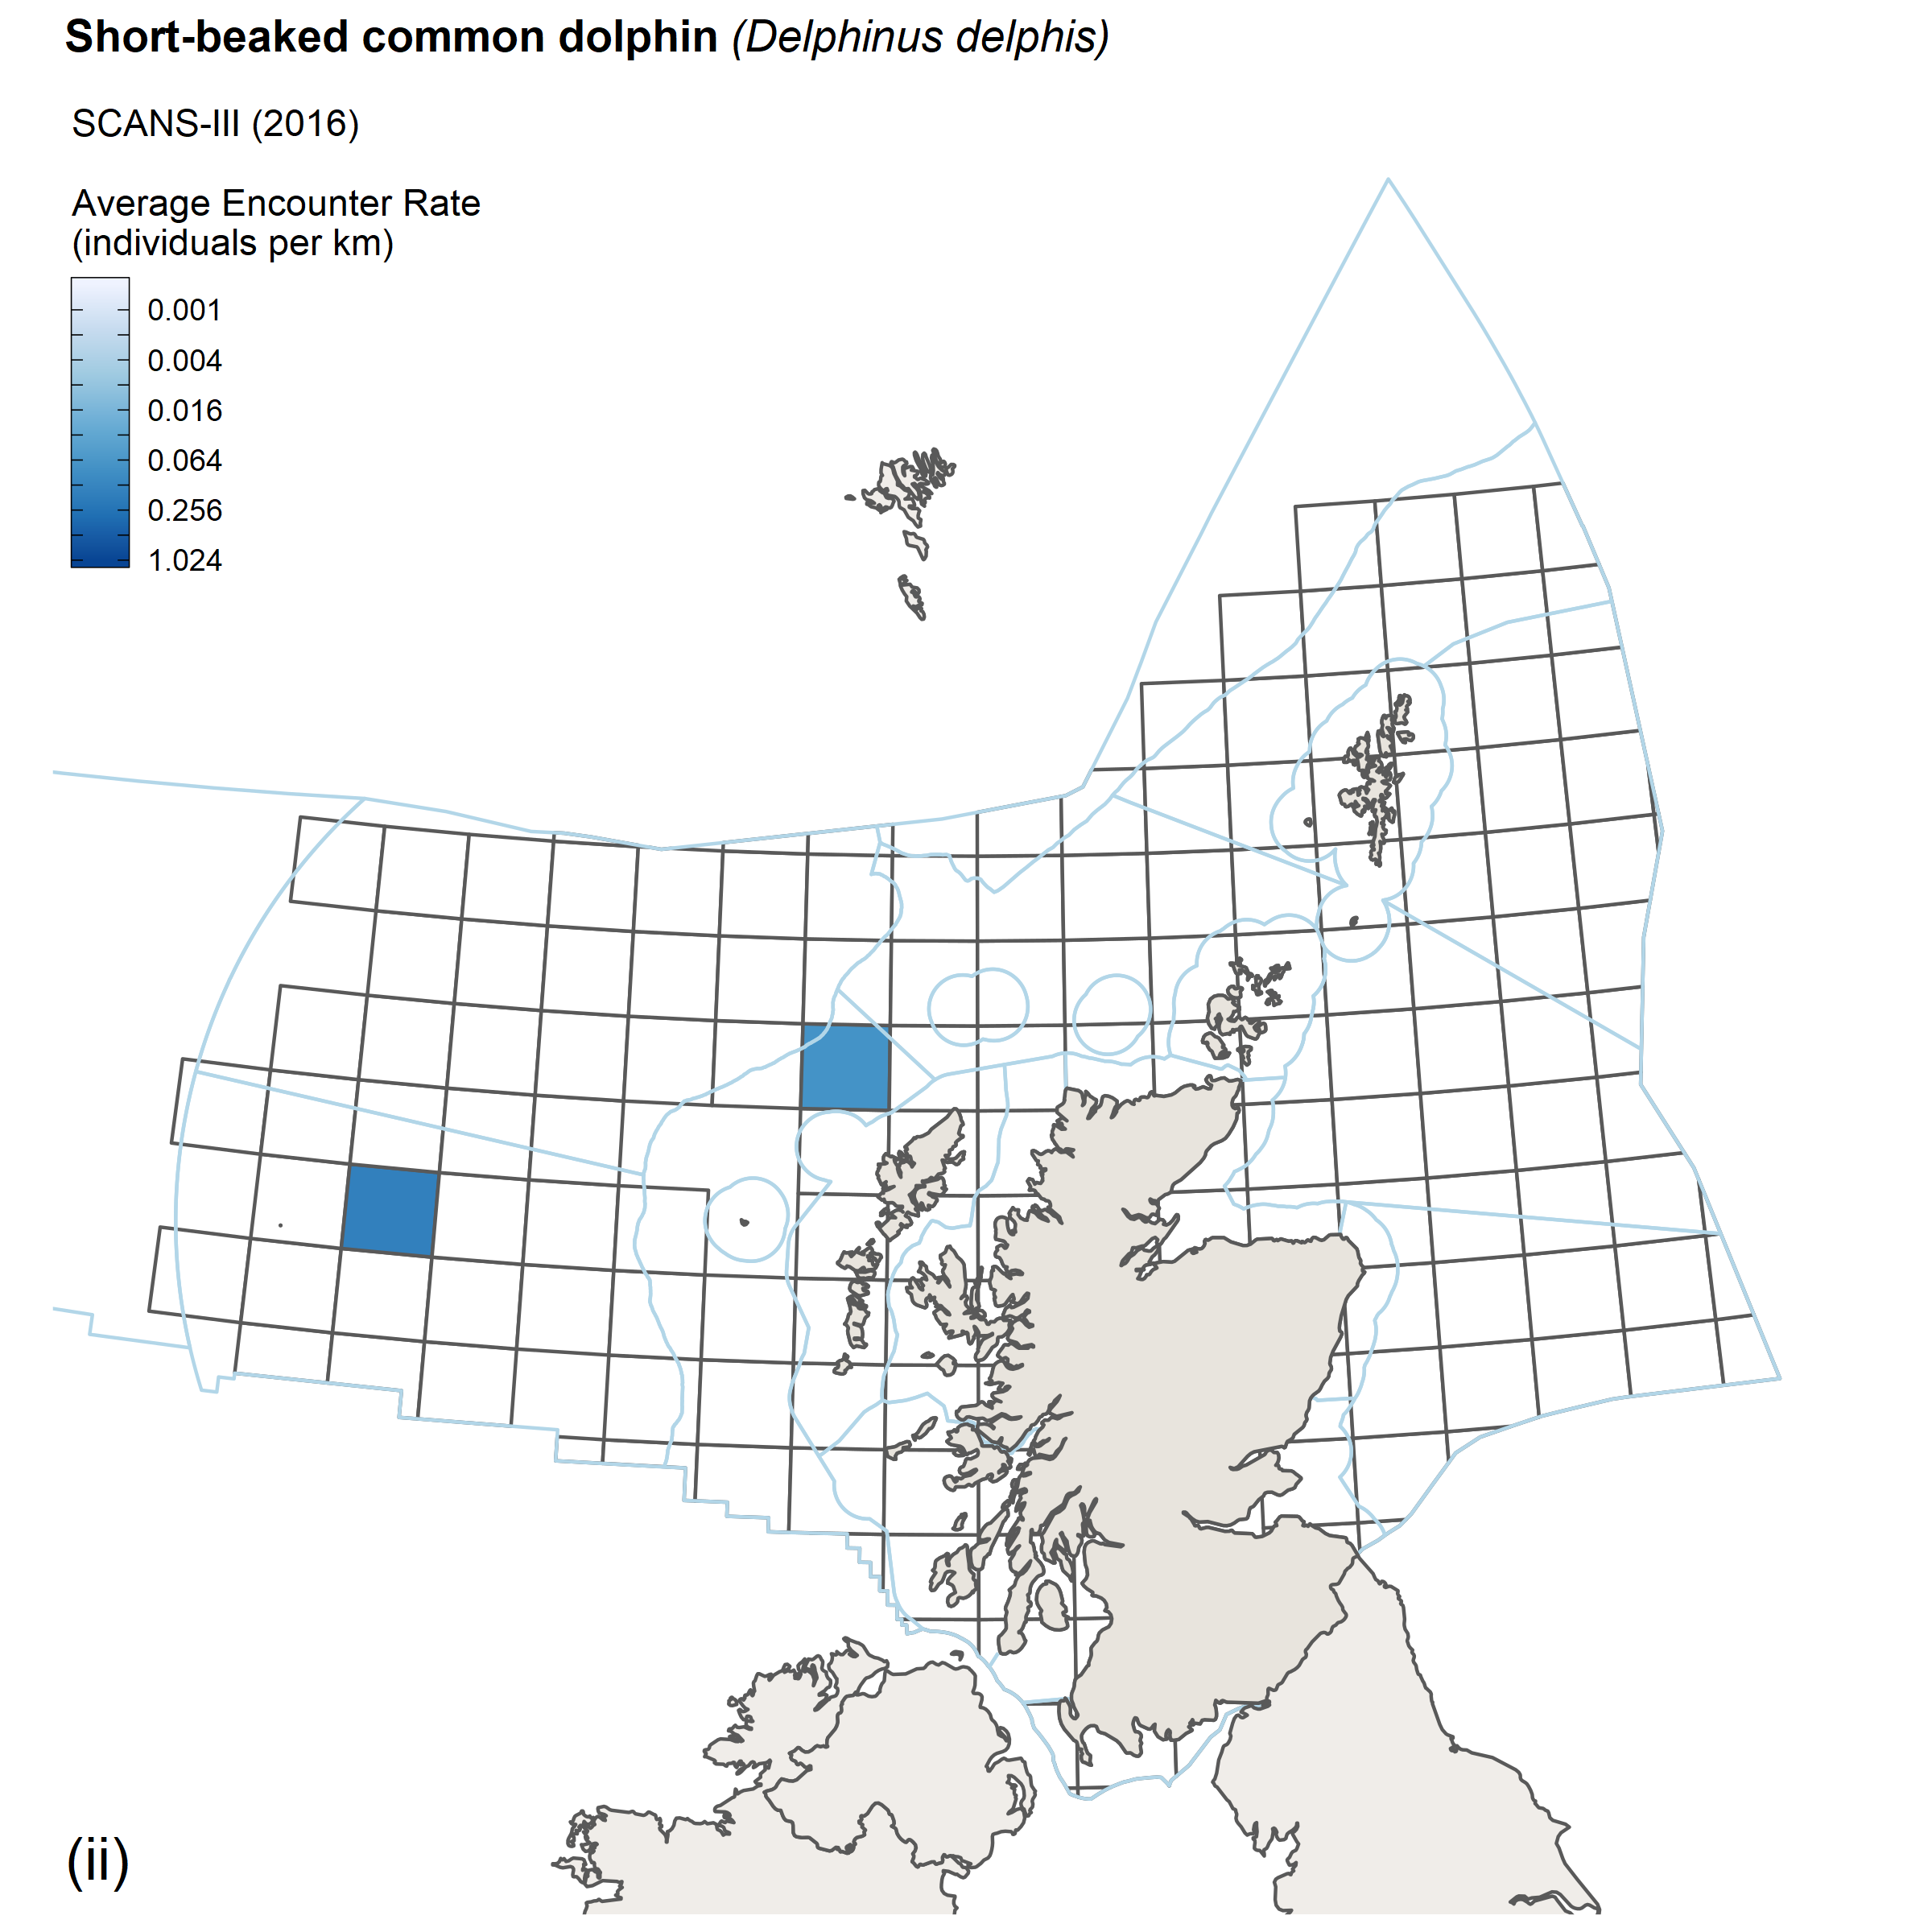 Encounter rates for short-beaked common dolphin from SCANS III